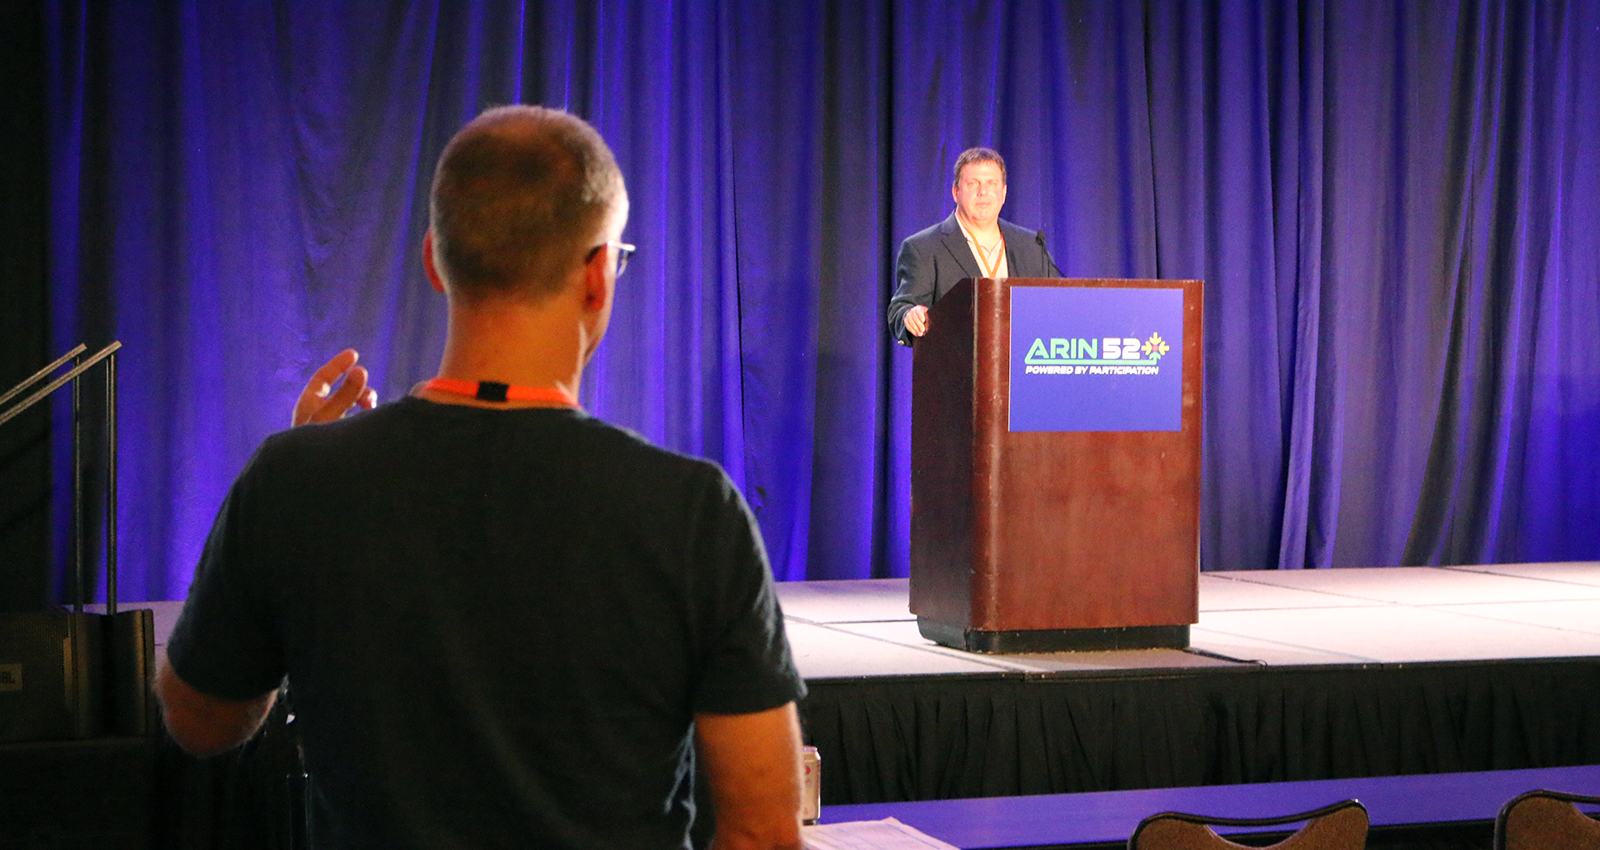 An ARIN 52 attendee asks a question after CTO Mark Kosters presented the Engineering Report